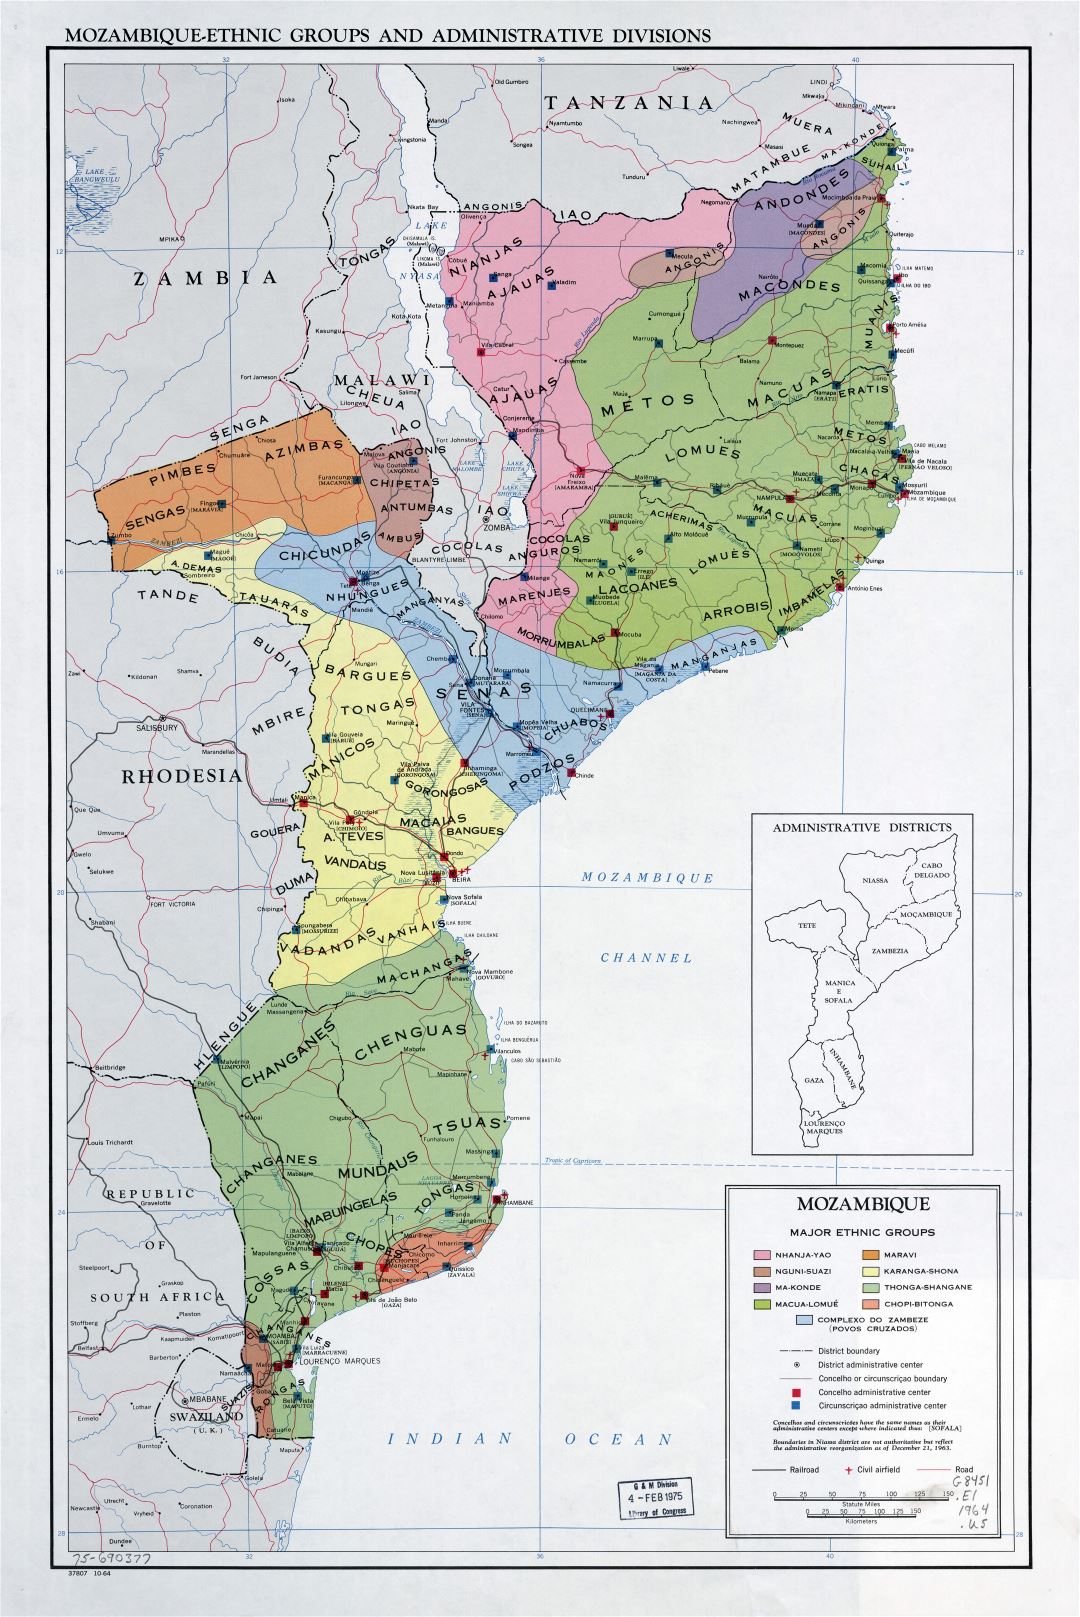 Large scale detailed map of Mozambique-Ethnic Groups and Administrative Divisions - 1964